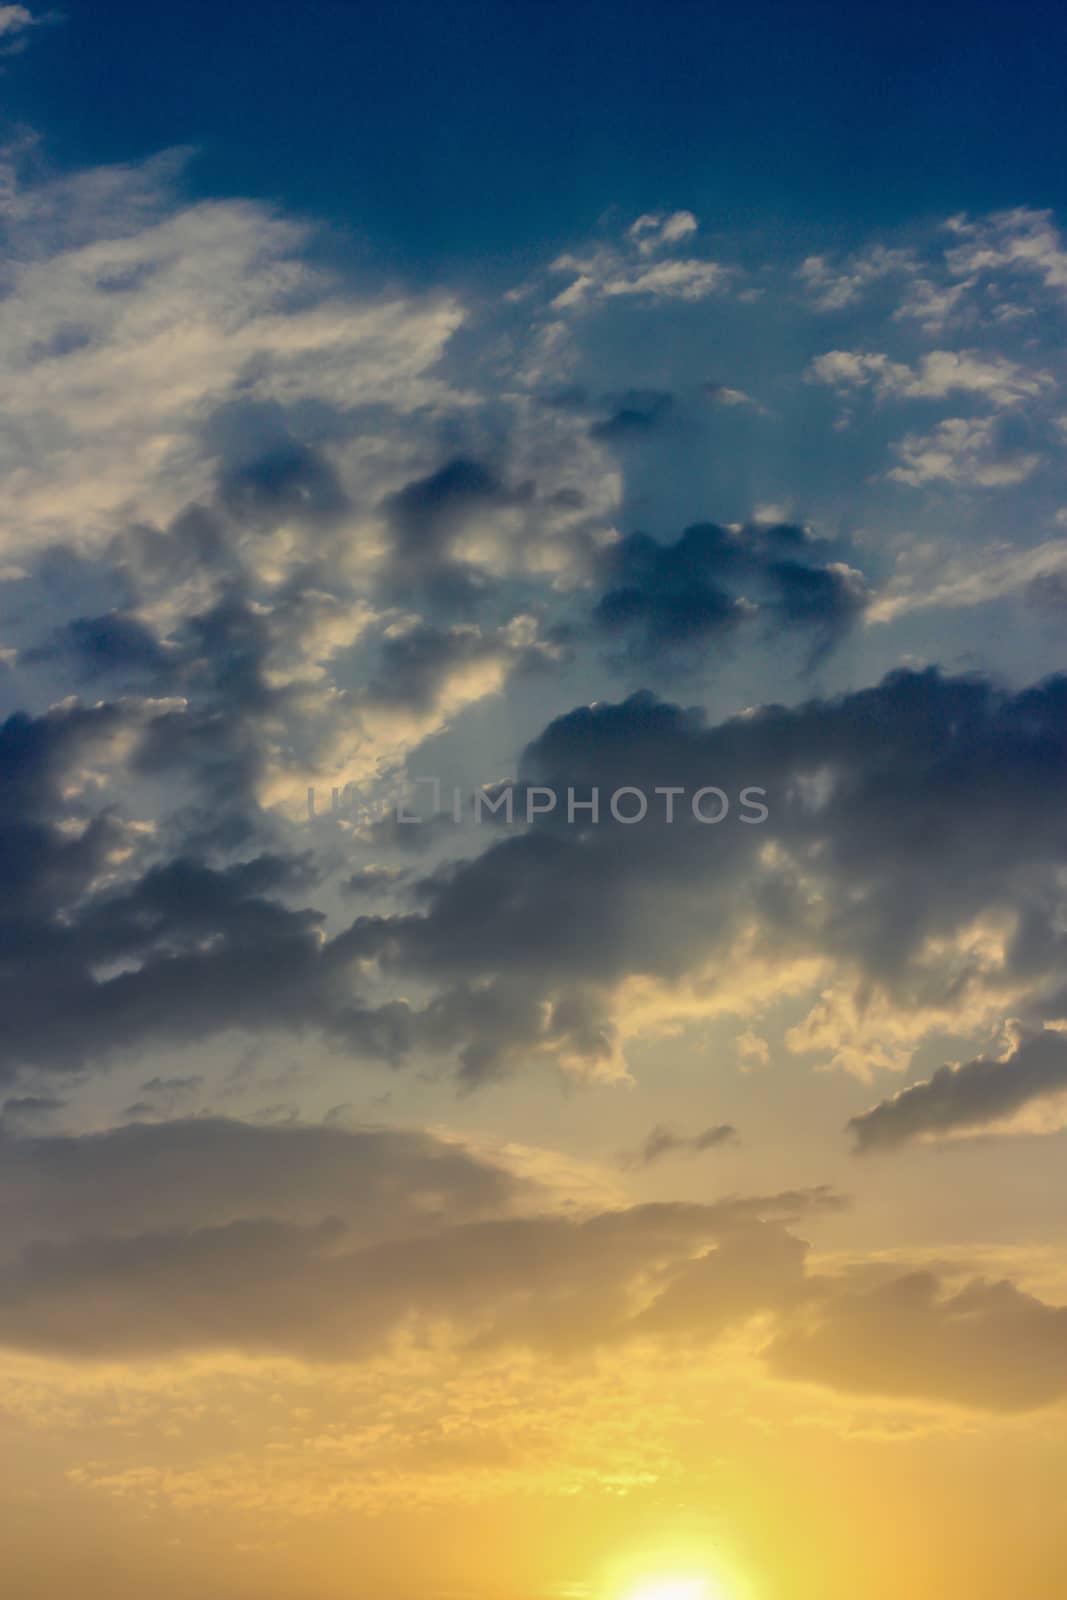 Colorful dramatic sky with cloud at sunset.Sky with sun background